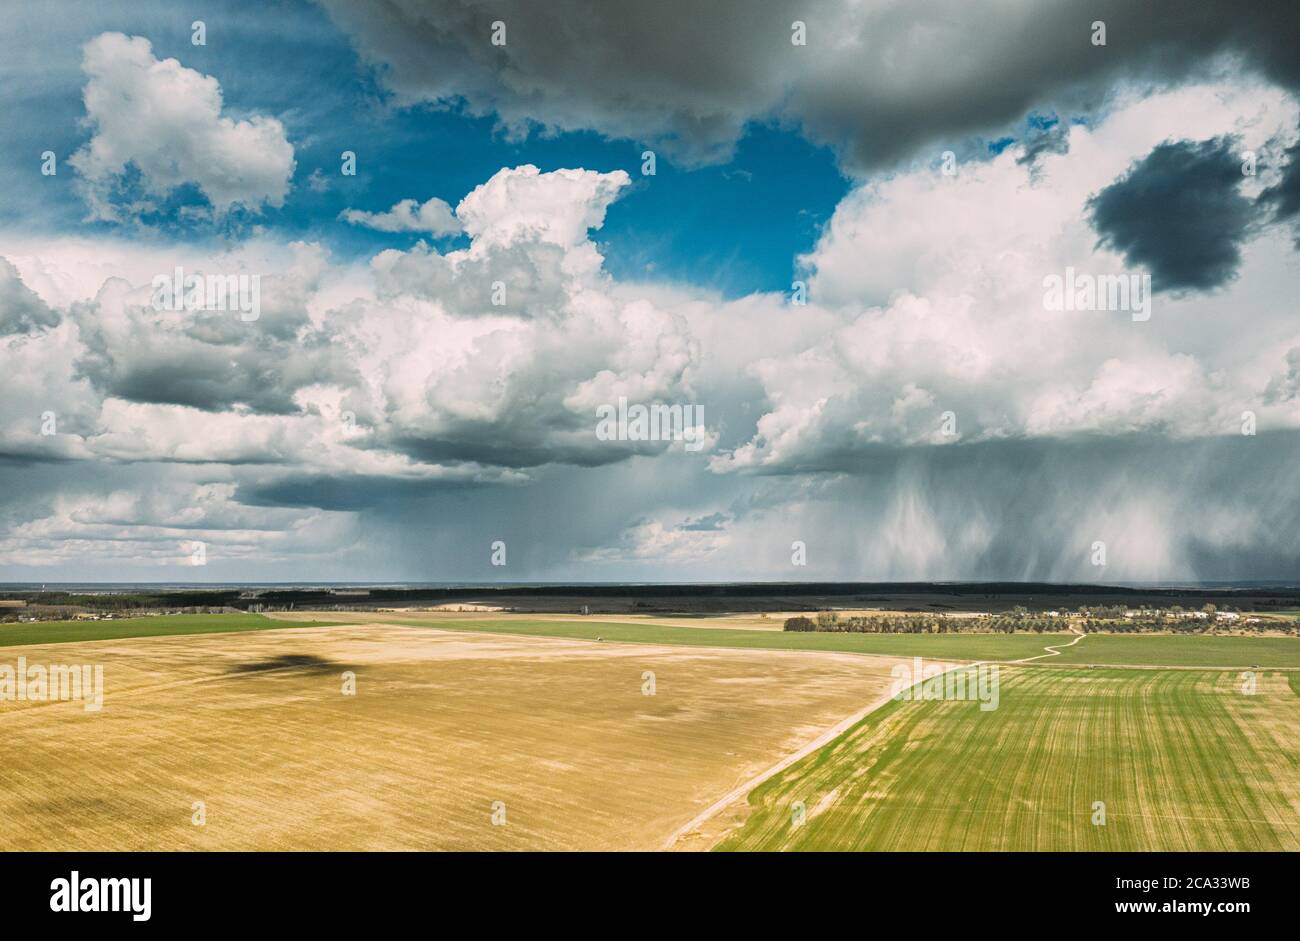 Aerial View. Amazing Natural Dramatic Sky With Rain Clouds Above Countryside Rural Field Landscape In Spring Summer Cloudy Day. Scenic Sky With Stock Photo